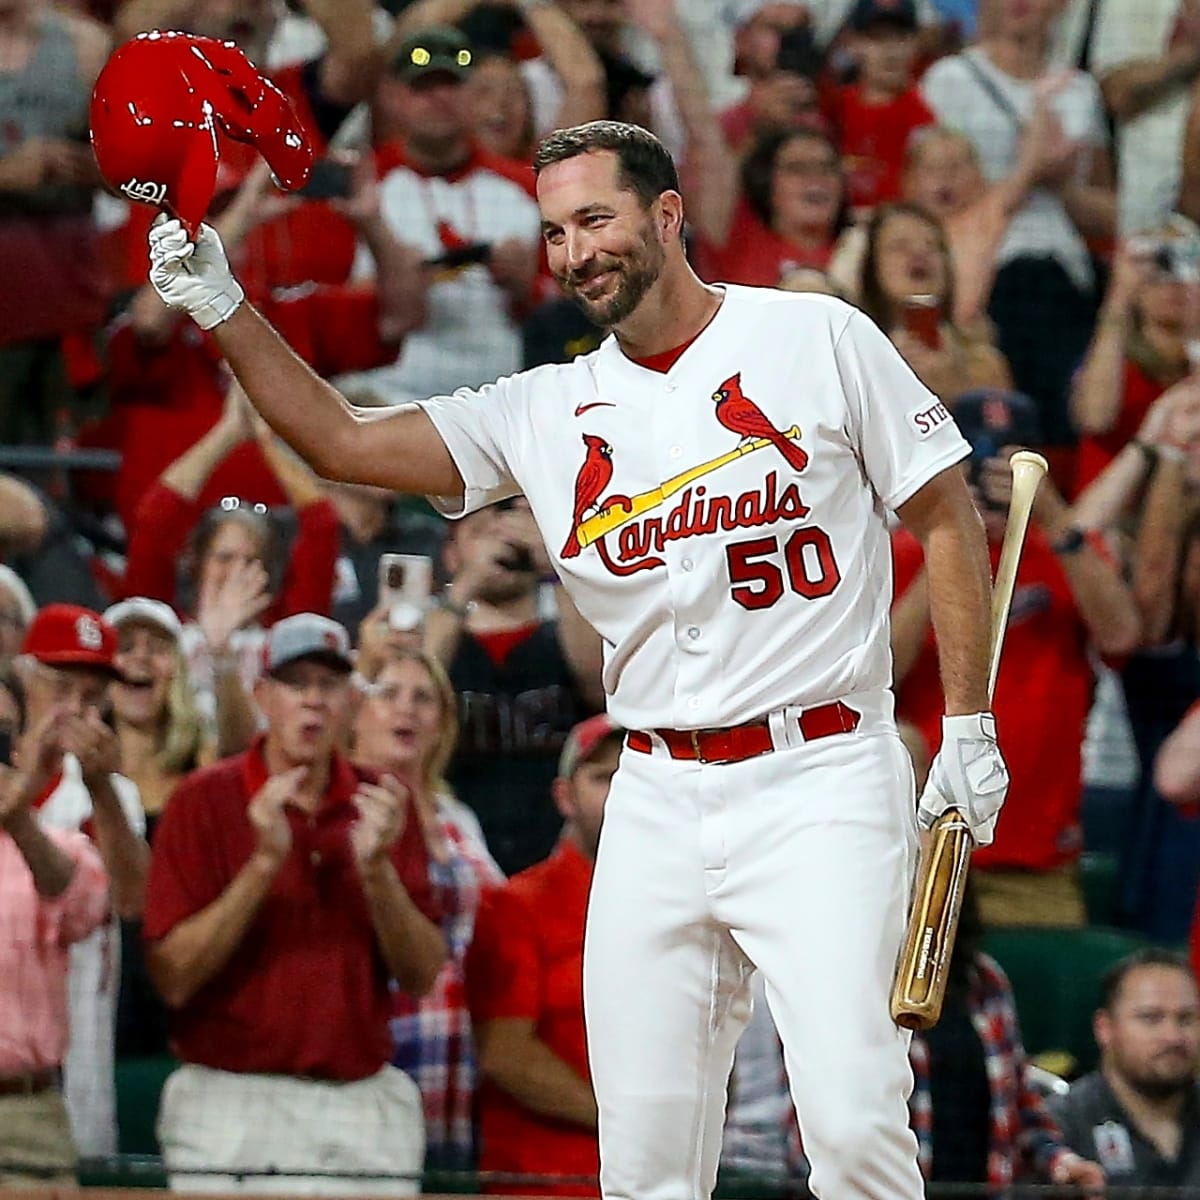 This is what the Cardinals gave Adam Wainwright for retirement